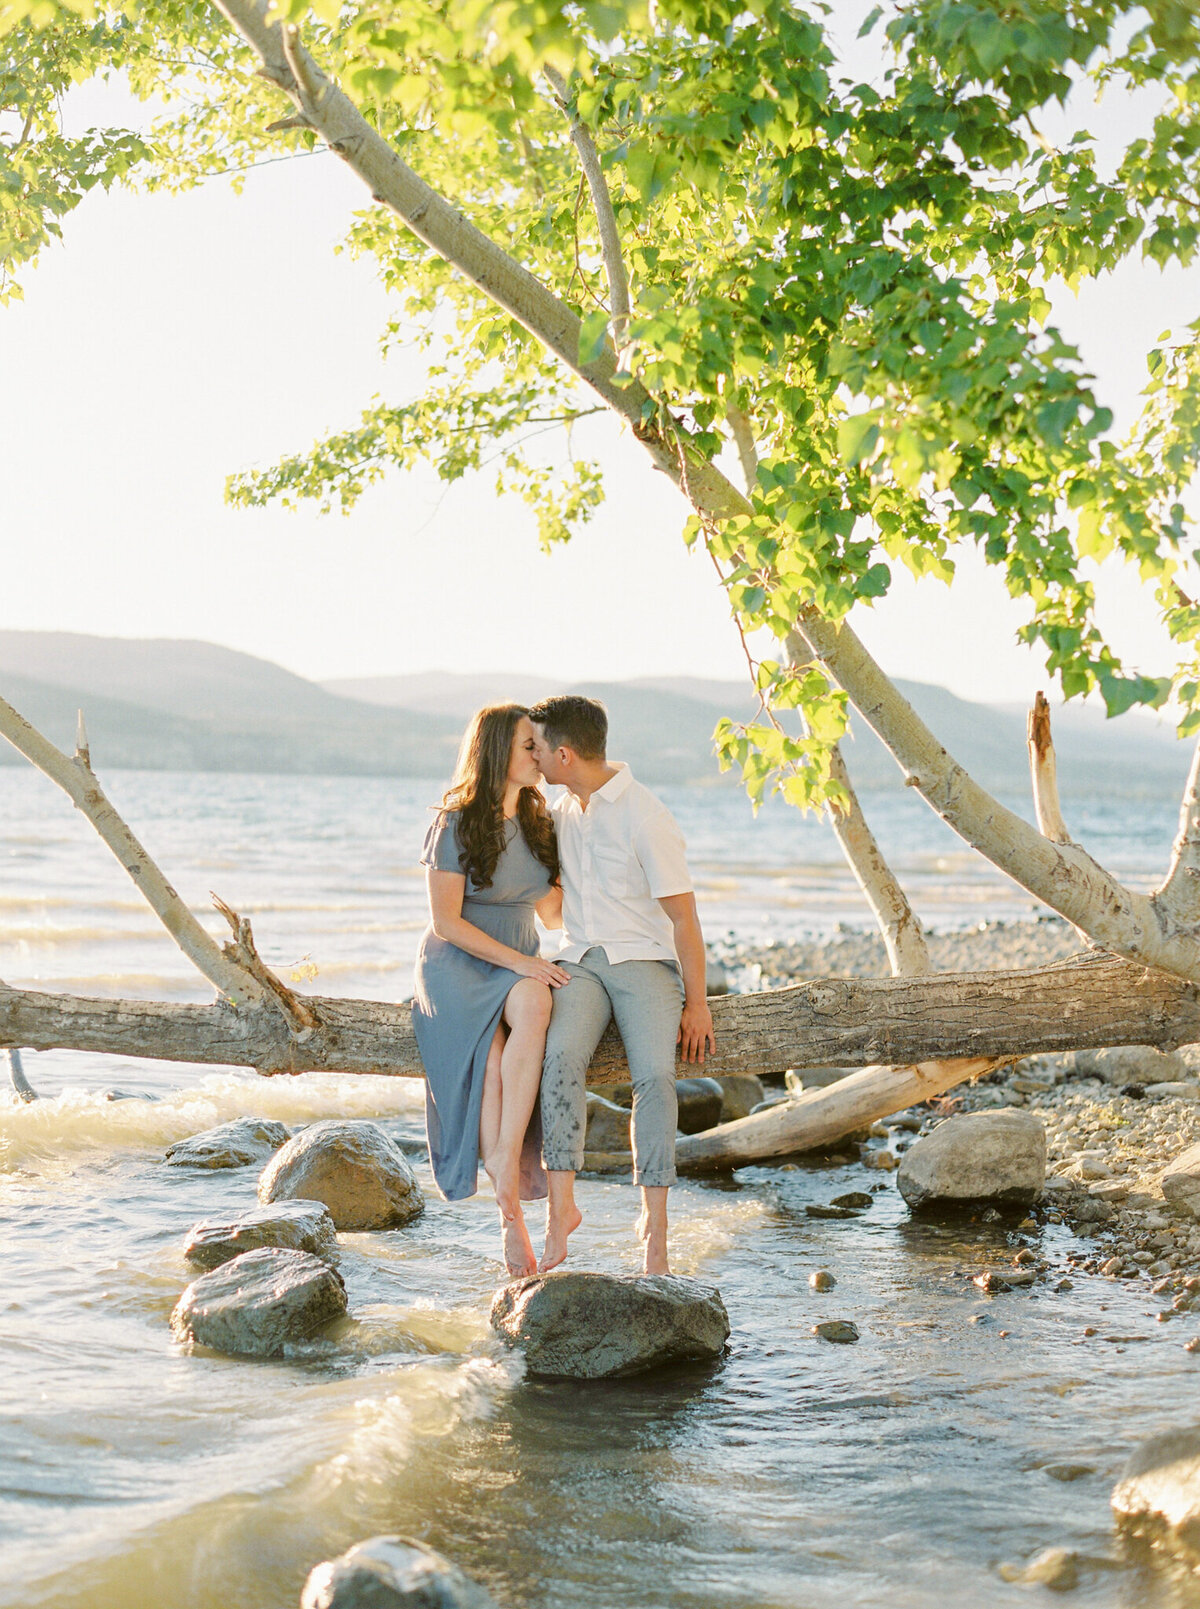 Beautiful engagement session inspiration, couple sitting on a tree branch over water, captured by Justine Milton Photography, fine art  wedding photographer & videographer in Calgary Alberta. Featured on the Bronte Bride Vendor Guide.